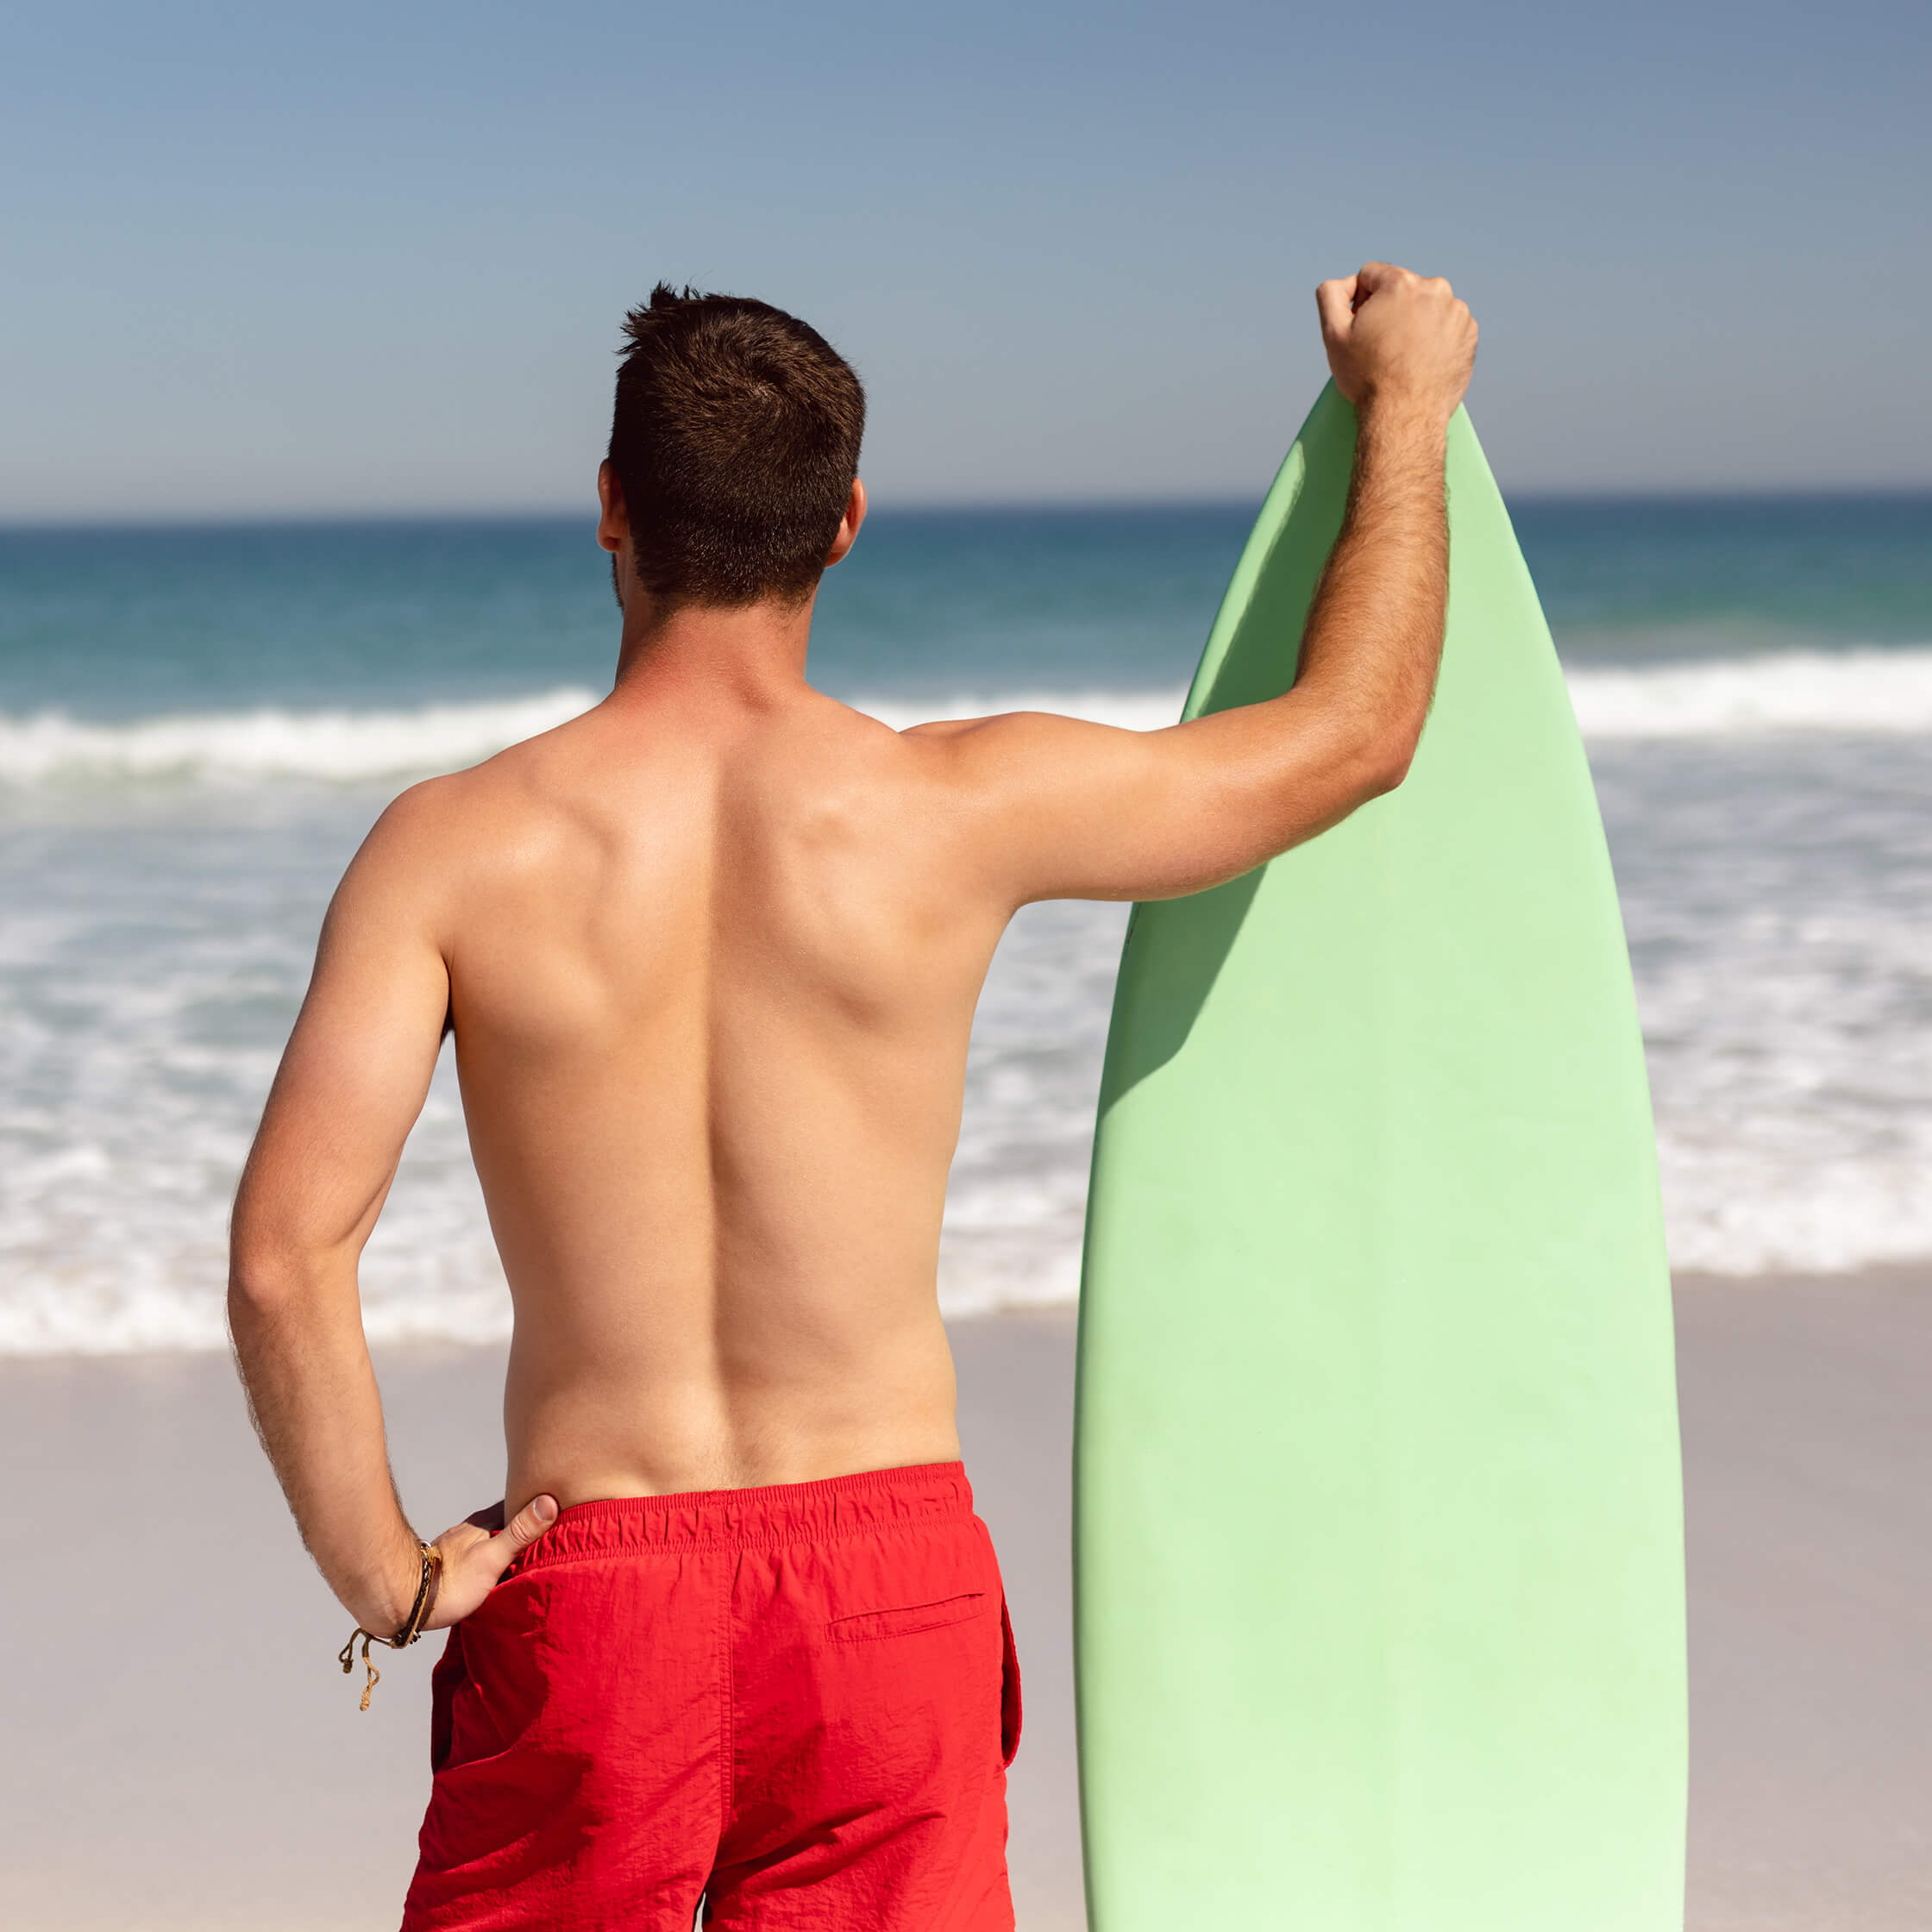 A young man prepares to surf after laser hair removal